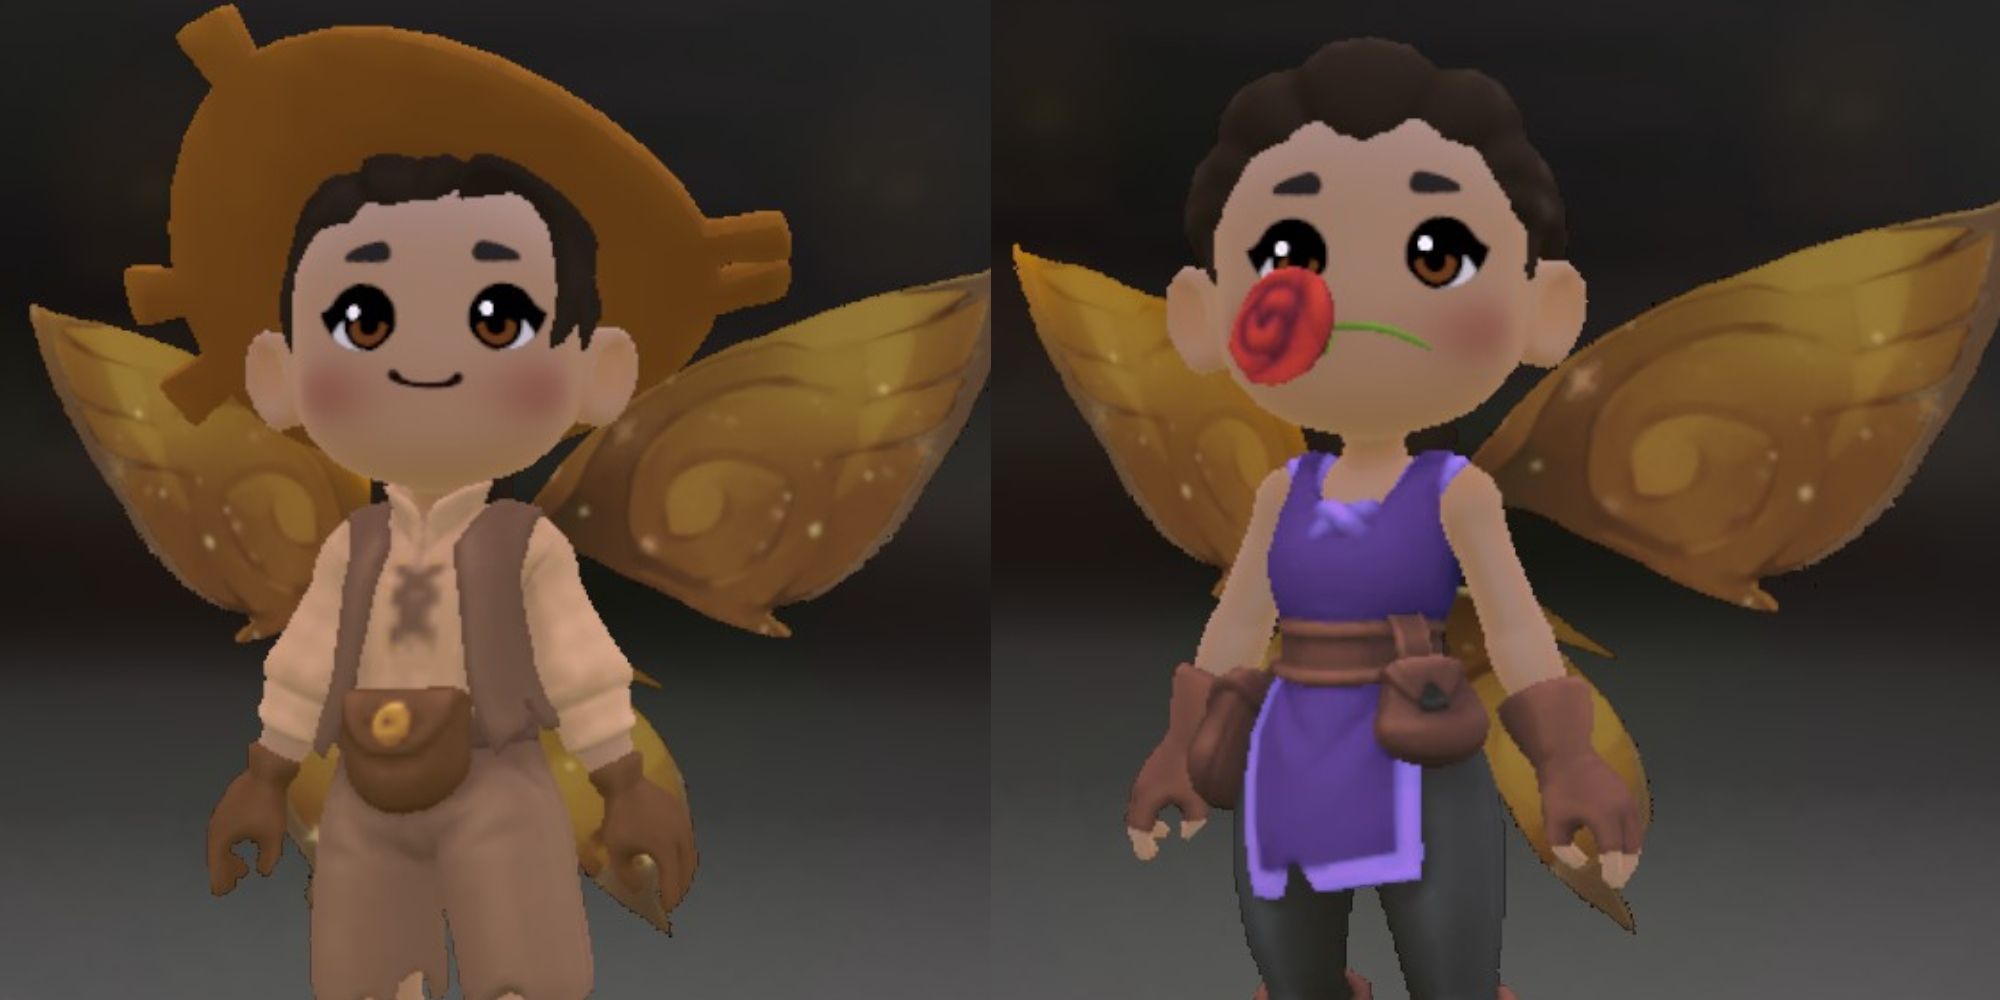 Fae Farm Player In Farm Outfit And Player With Rose In Mouth